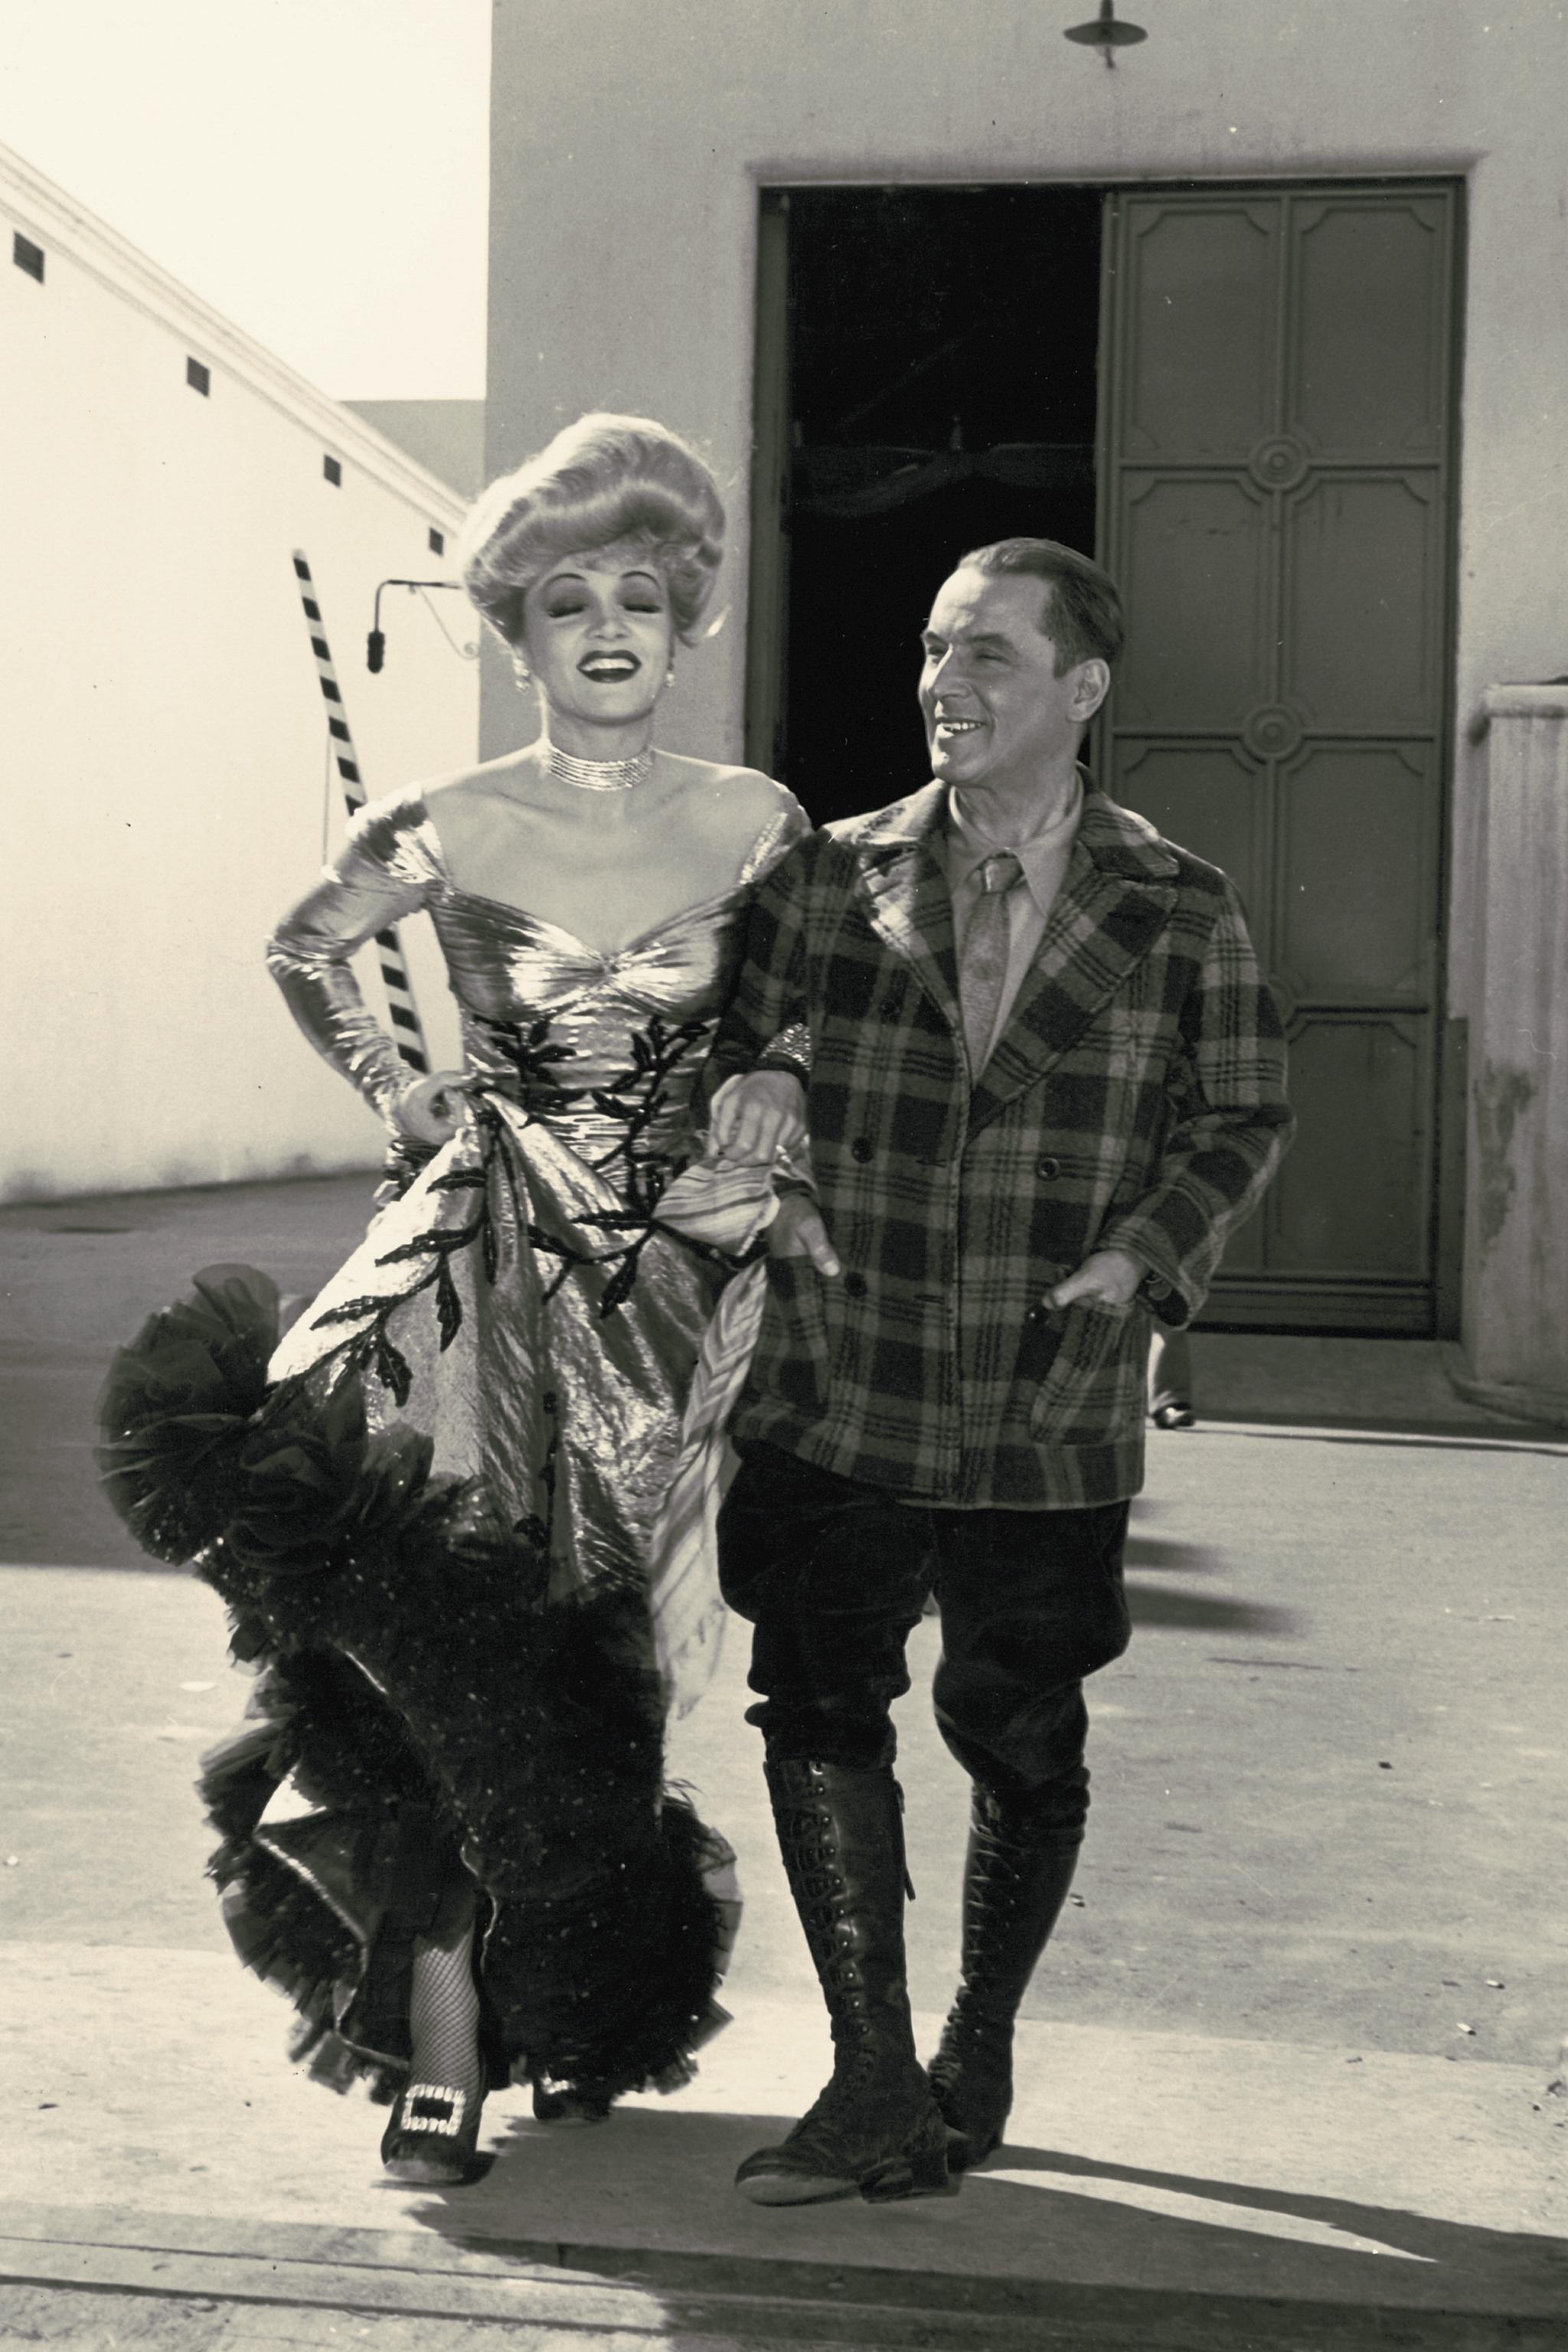 A man in a plaid blazer smiles at a woman in a glamorous dress.